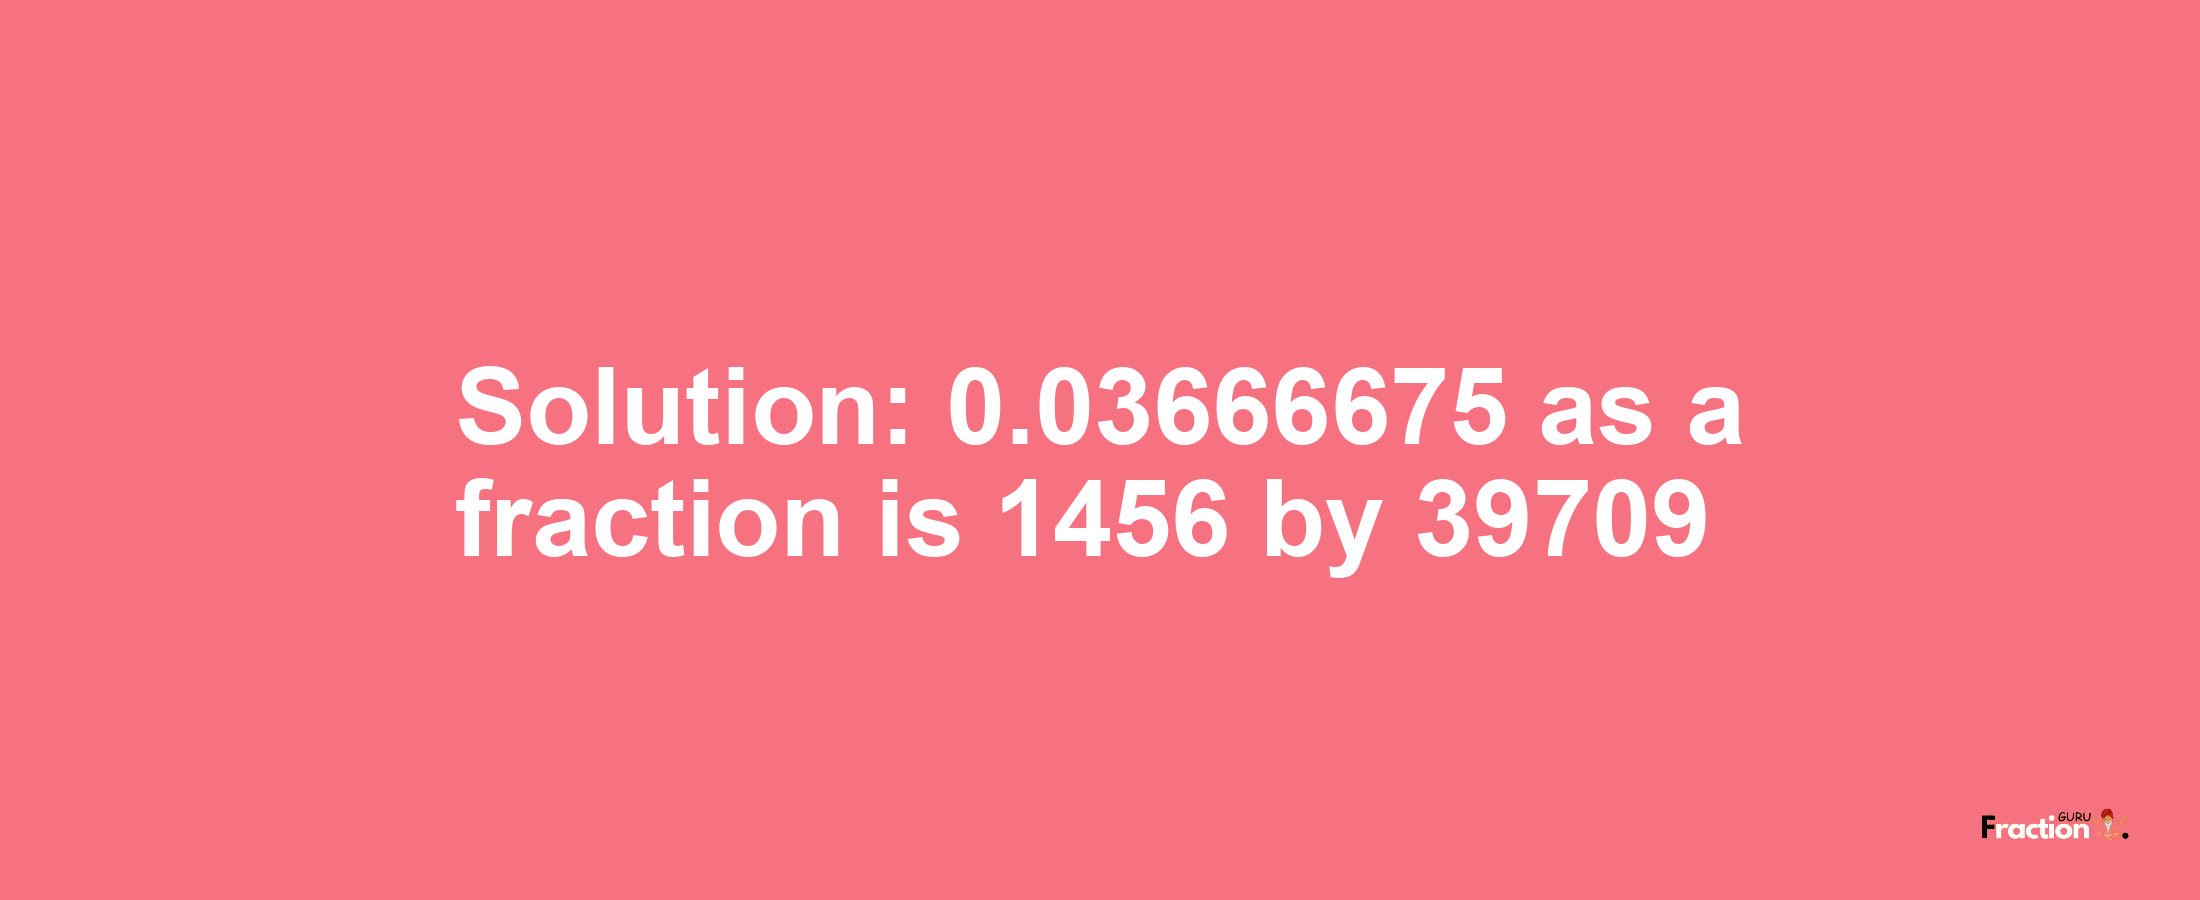 Solution:0.03666675 as a fraction is 1456/39709